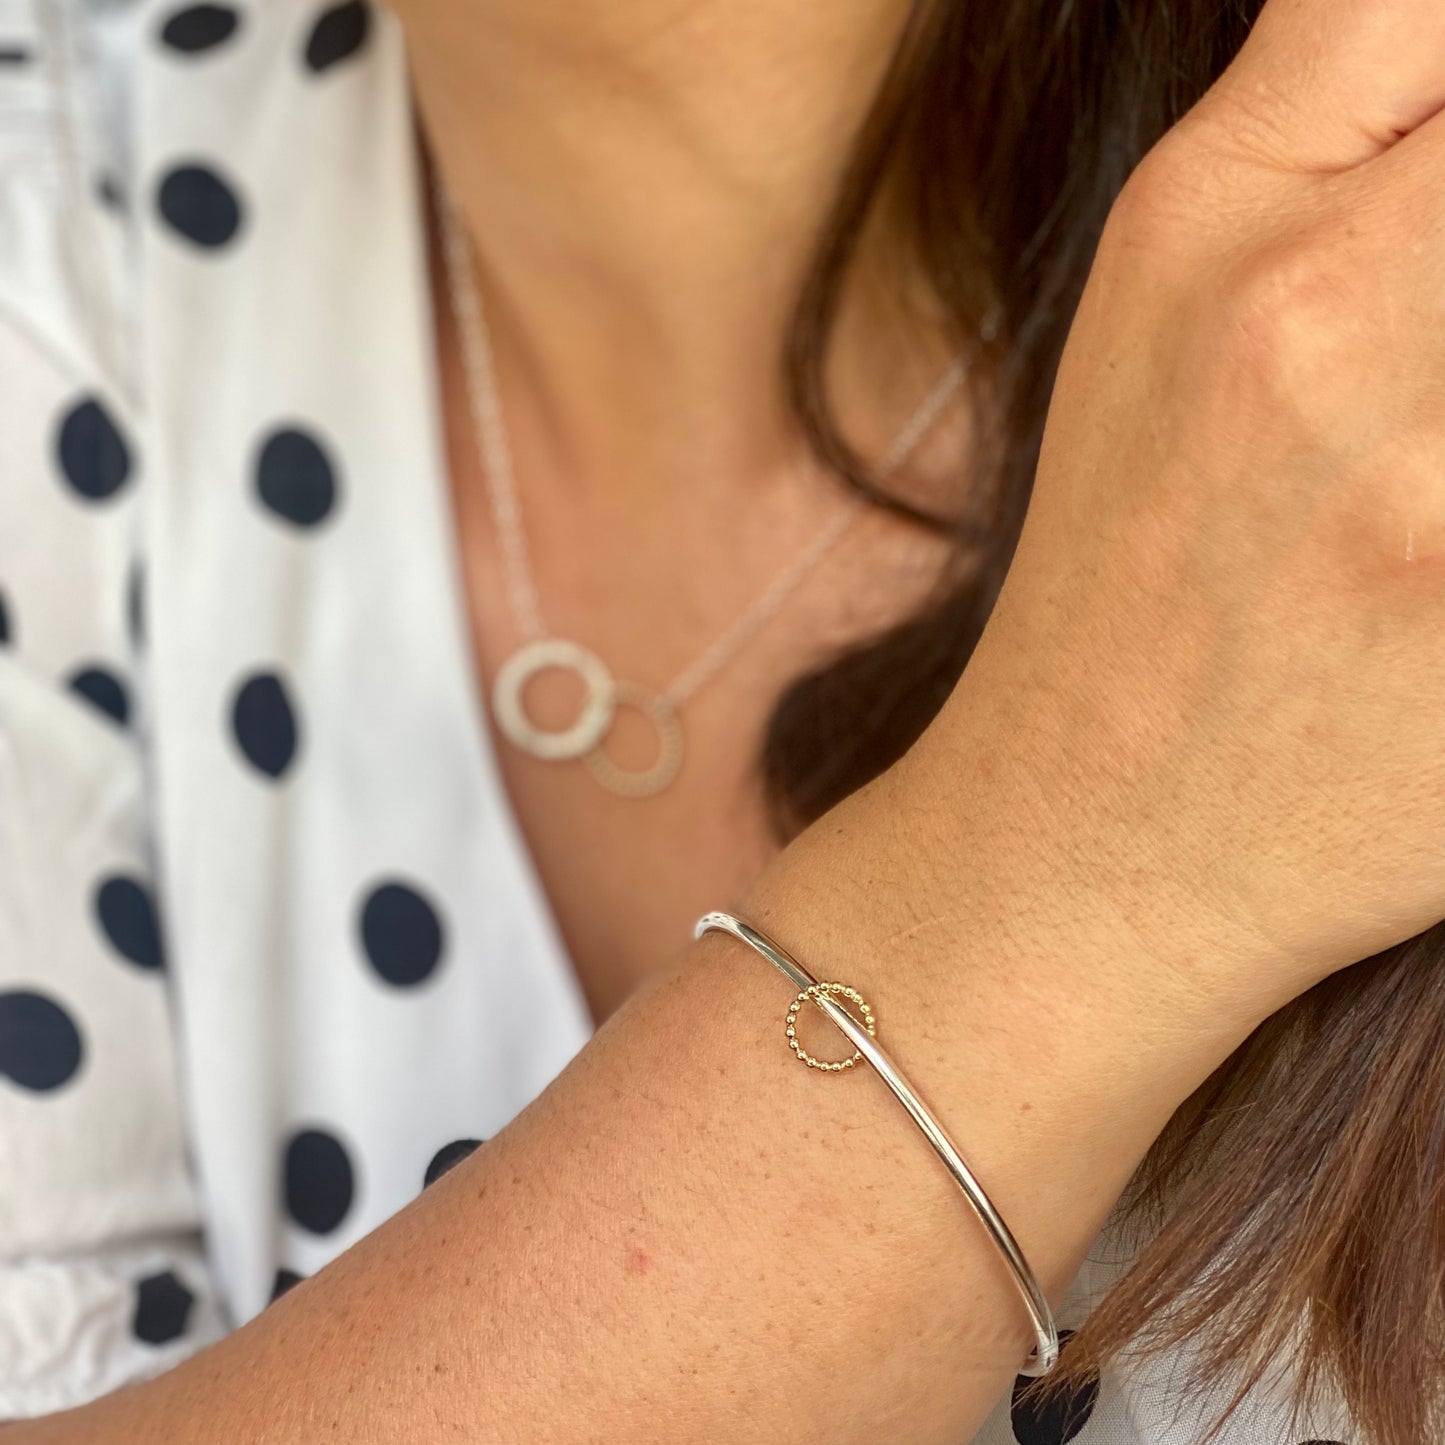 The Crown Halo Bangle - sterling silver bangle with silver or gold beaded crown hoop